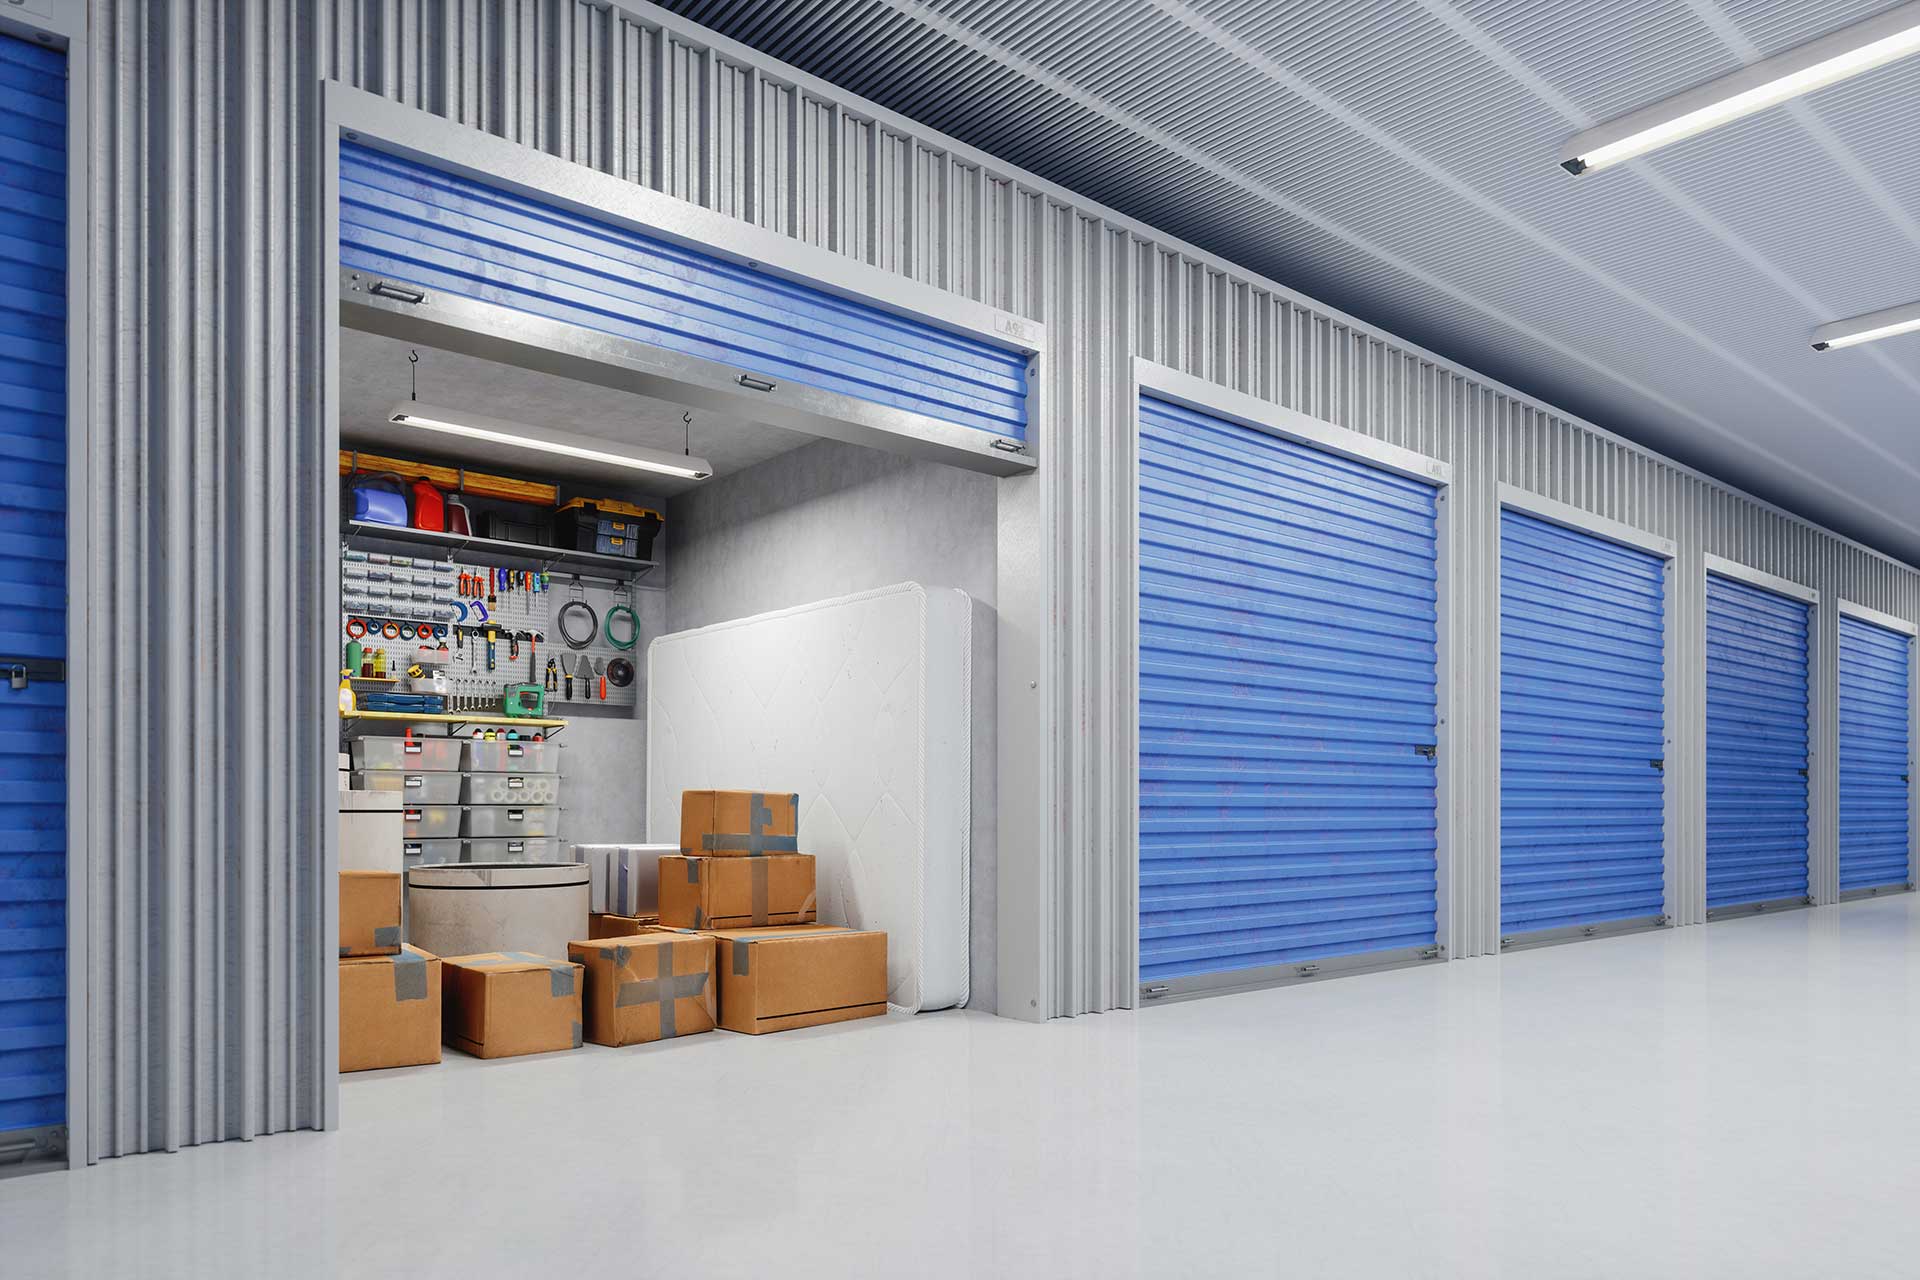 Storage units with blue doors, one is open showing boxes, a mattress, and other items. As the business owner of a self storage facility, you are subject to damage, theft, and liability that inherently come with owning or renting this type of space. Protecting your self-storage business, employees, monthly income, and legal rights is of essential importance.